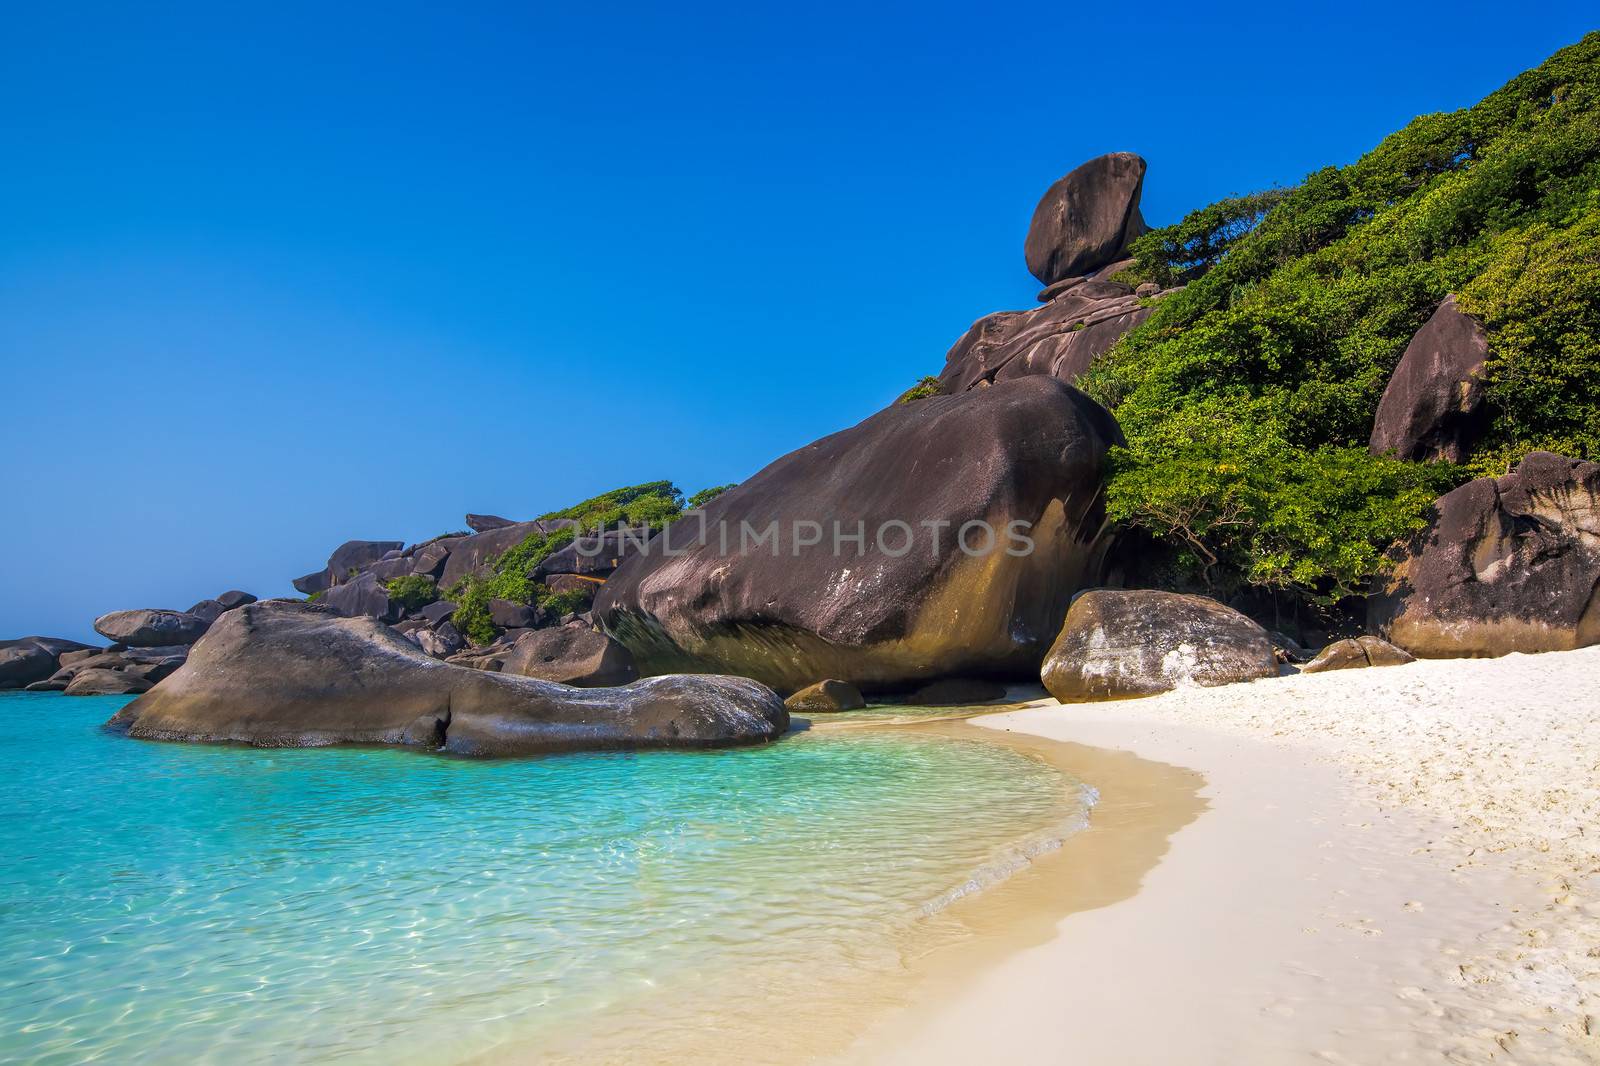 The famous rock of Similan Islands in Thailand